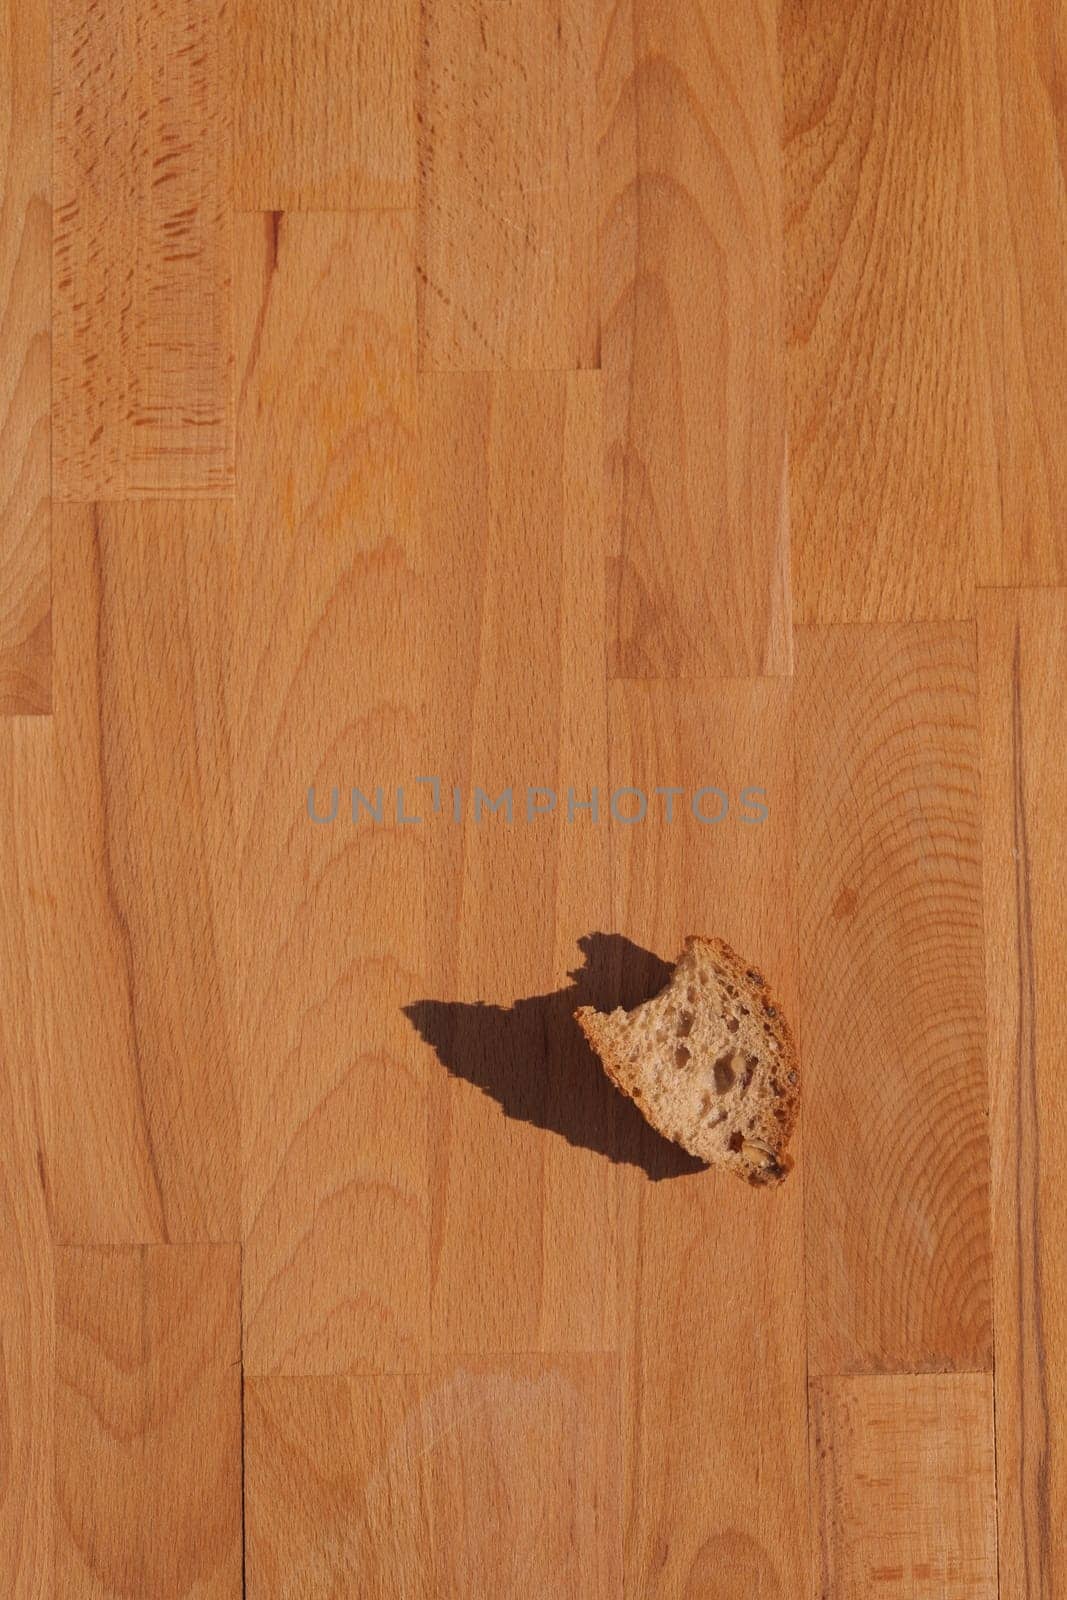 A Piece Of Bread with shadow On A Wooden cutting board by apavlin